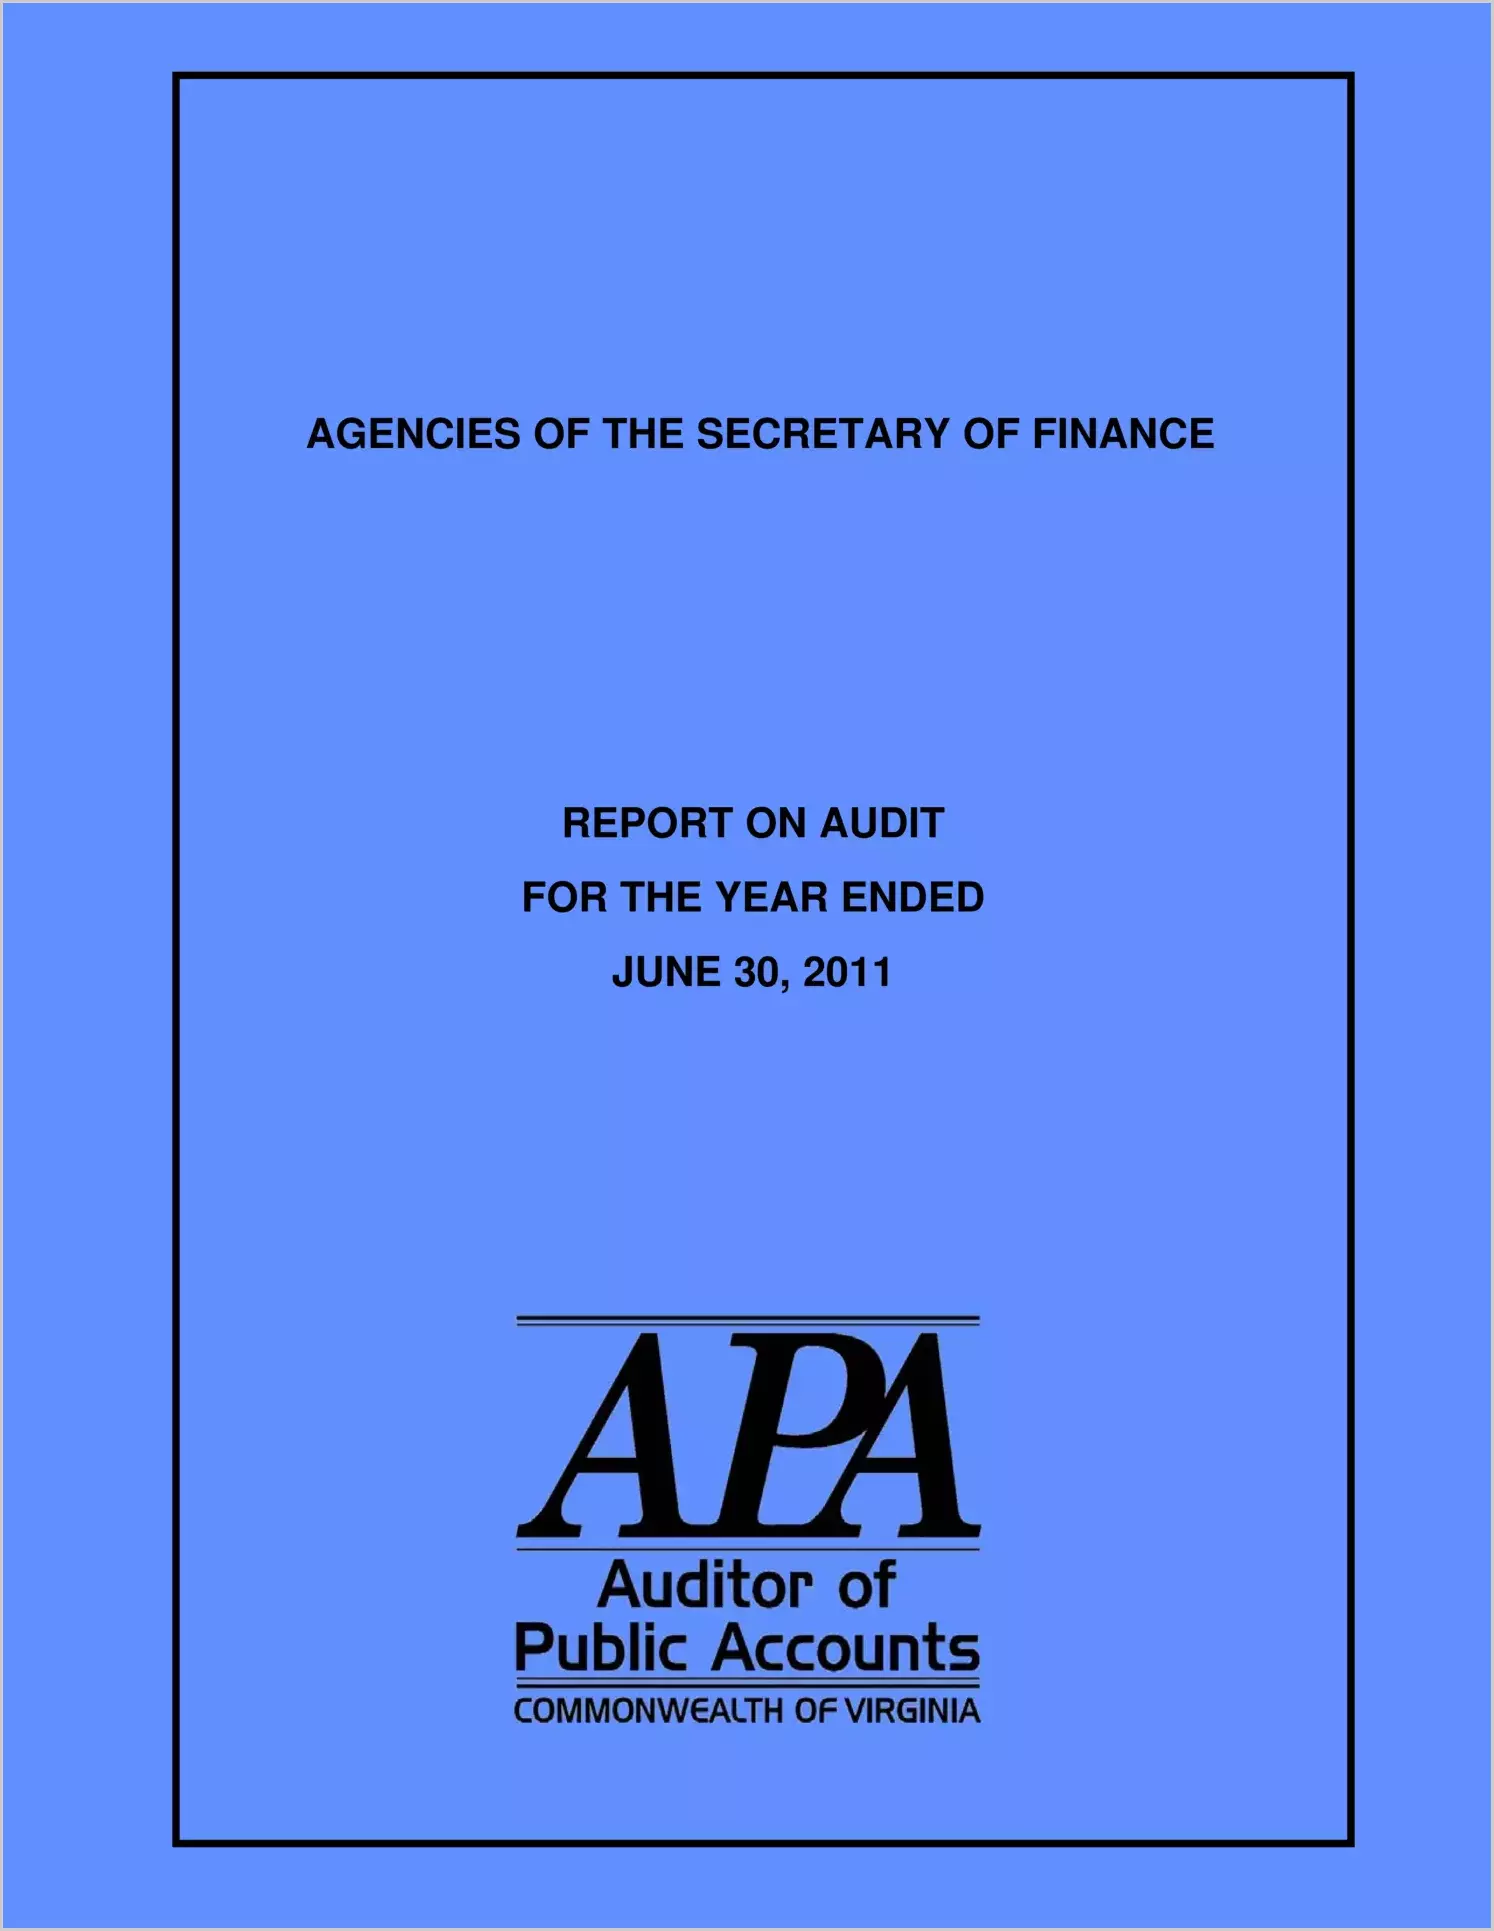 Agencies of the Secretary of Finance report on audit for the year ended June 30, 2011